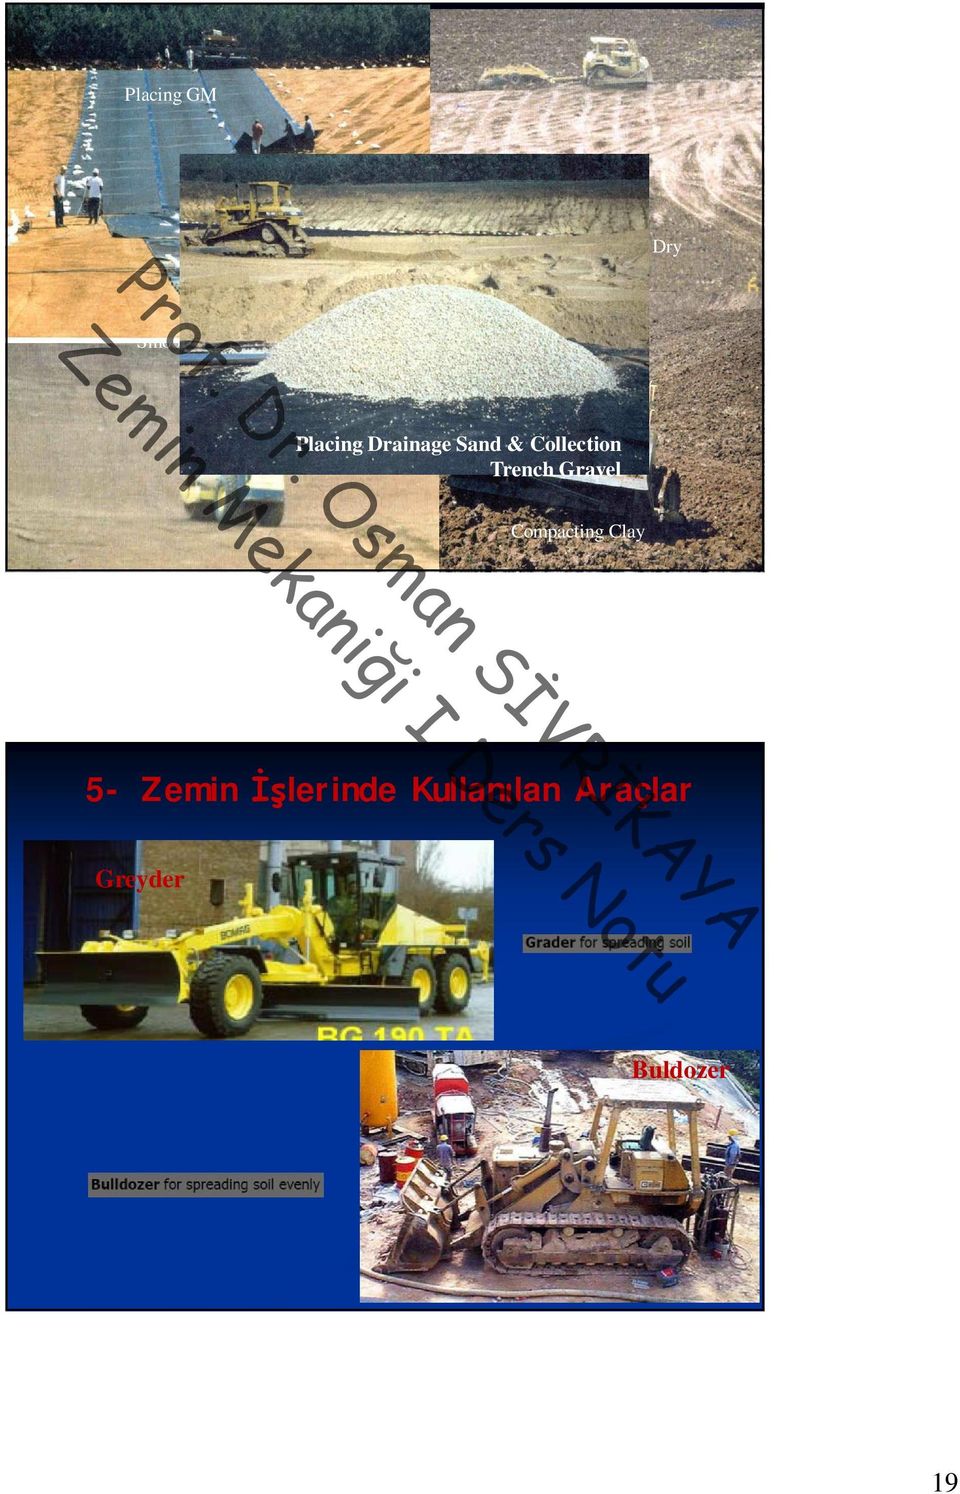 Drainage Sand & Collection Trench Gravel Compacting